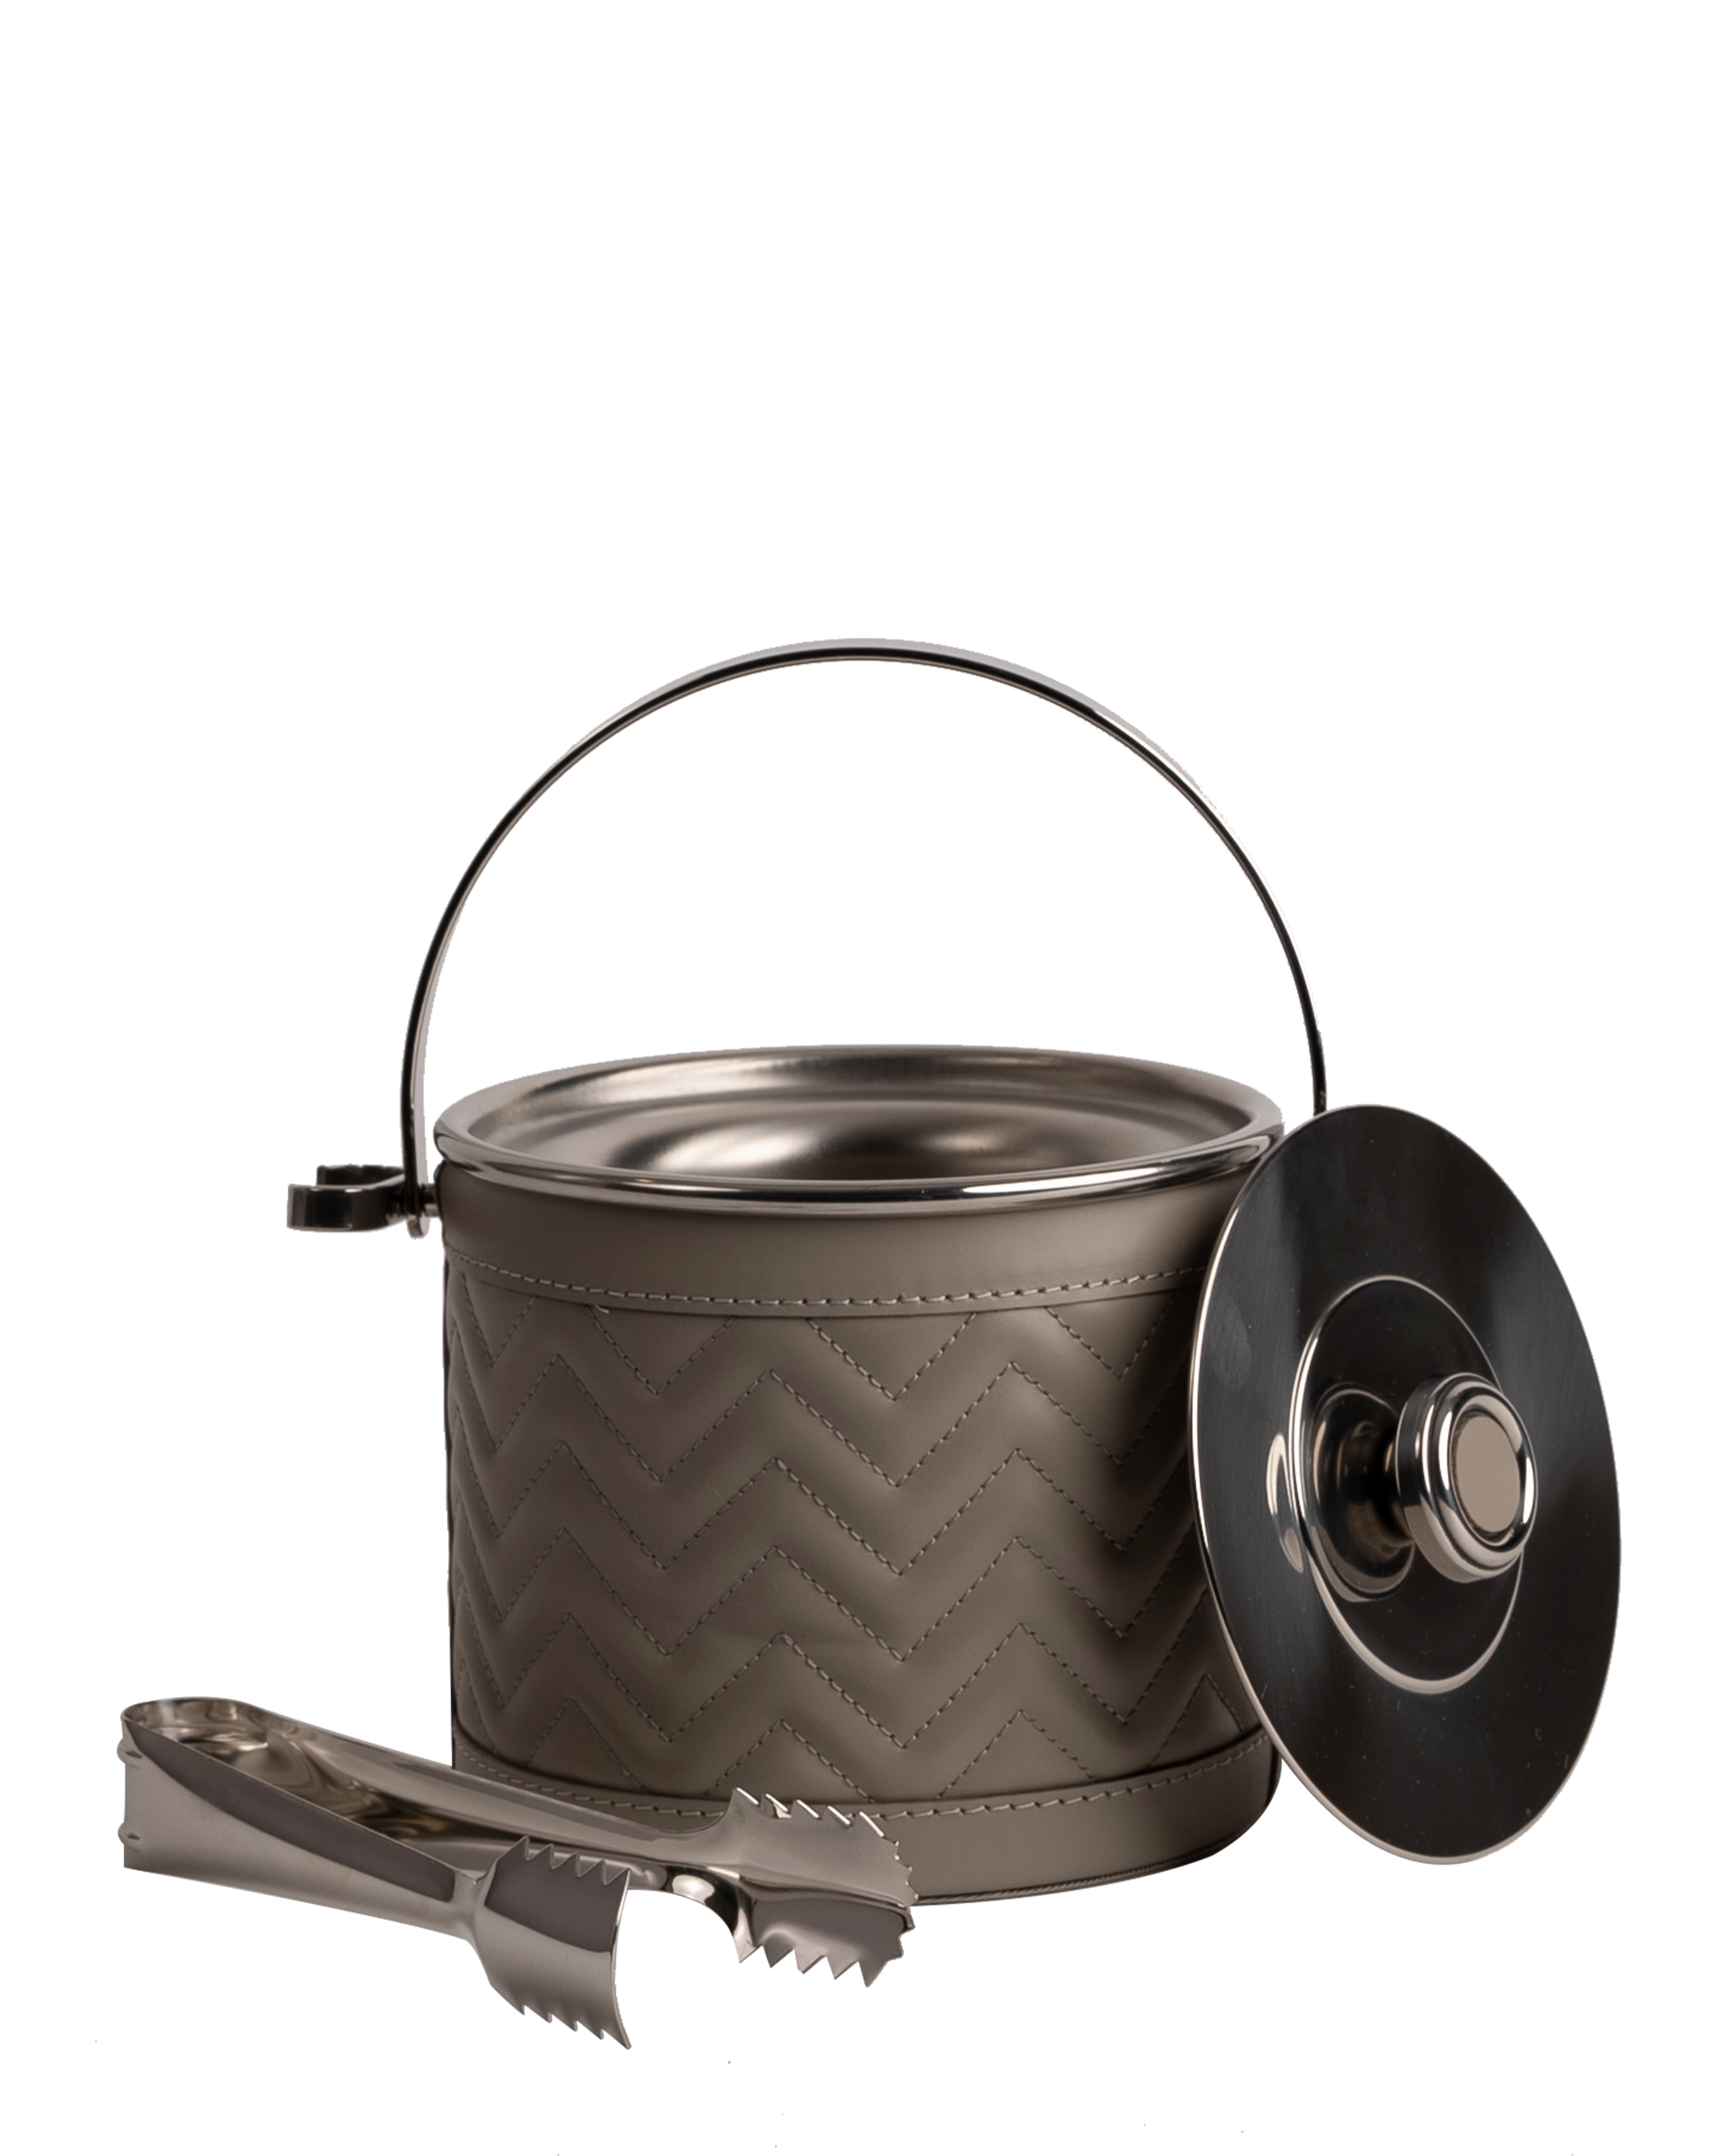 Gio- Stainless Steel Ice Bucket covered with herringbone leather - Maison SIA